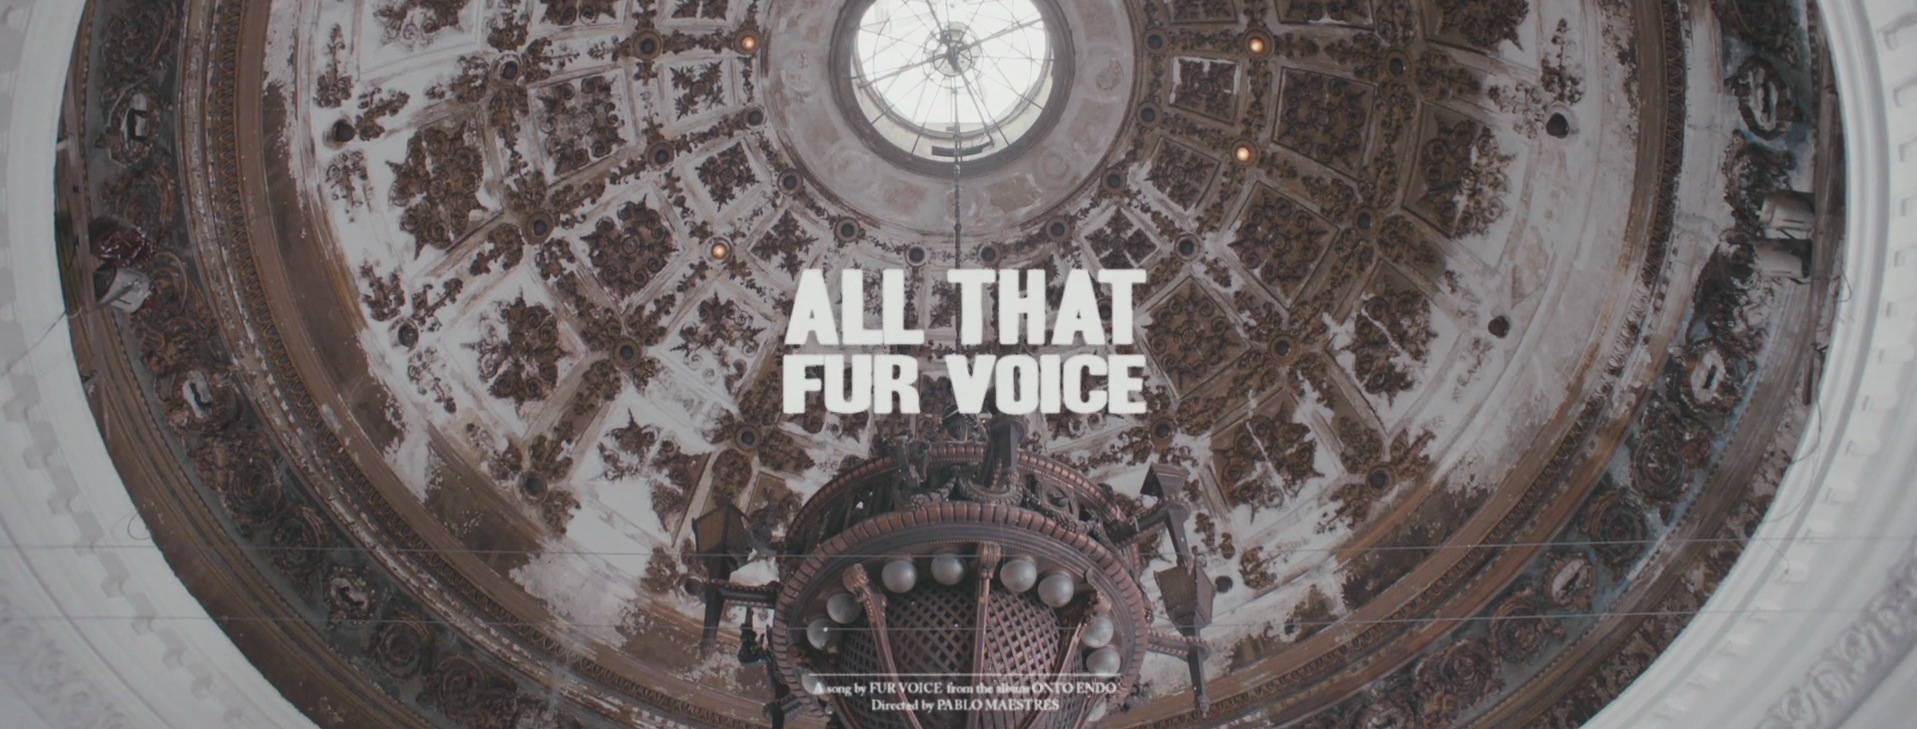 Fur Voice - All That9